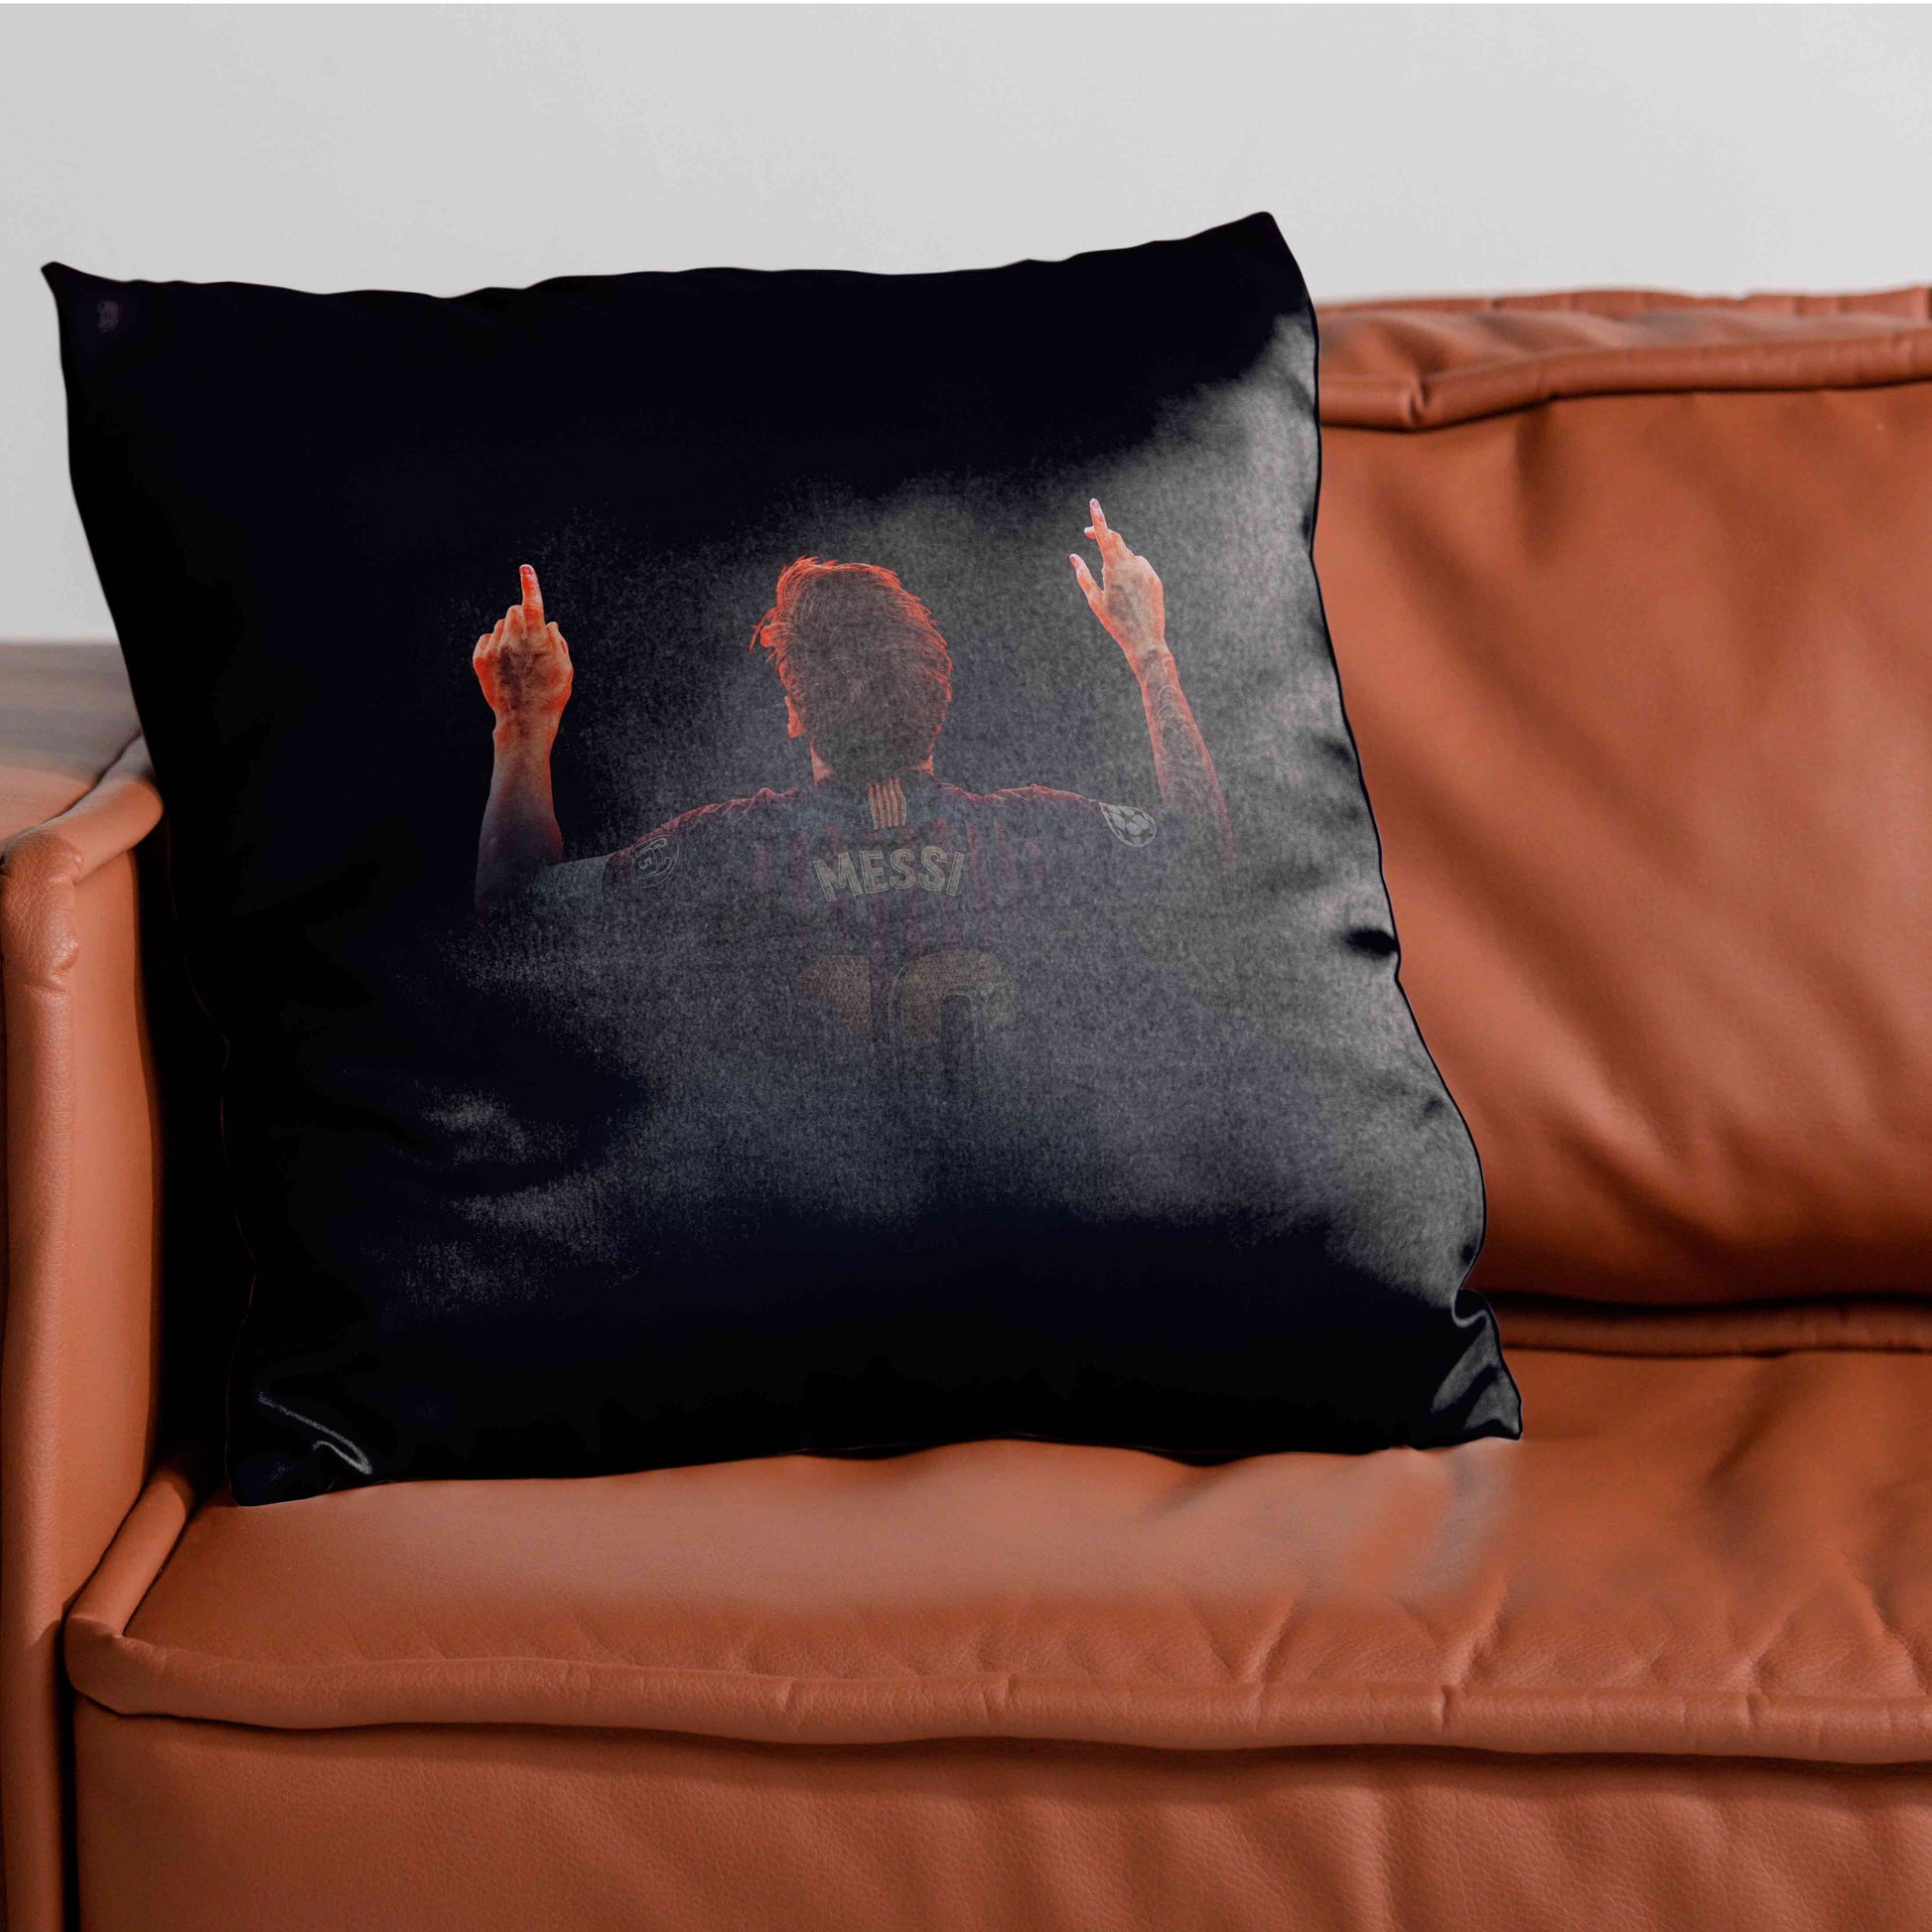 Messi 10 Cushion Cover trendy home